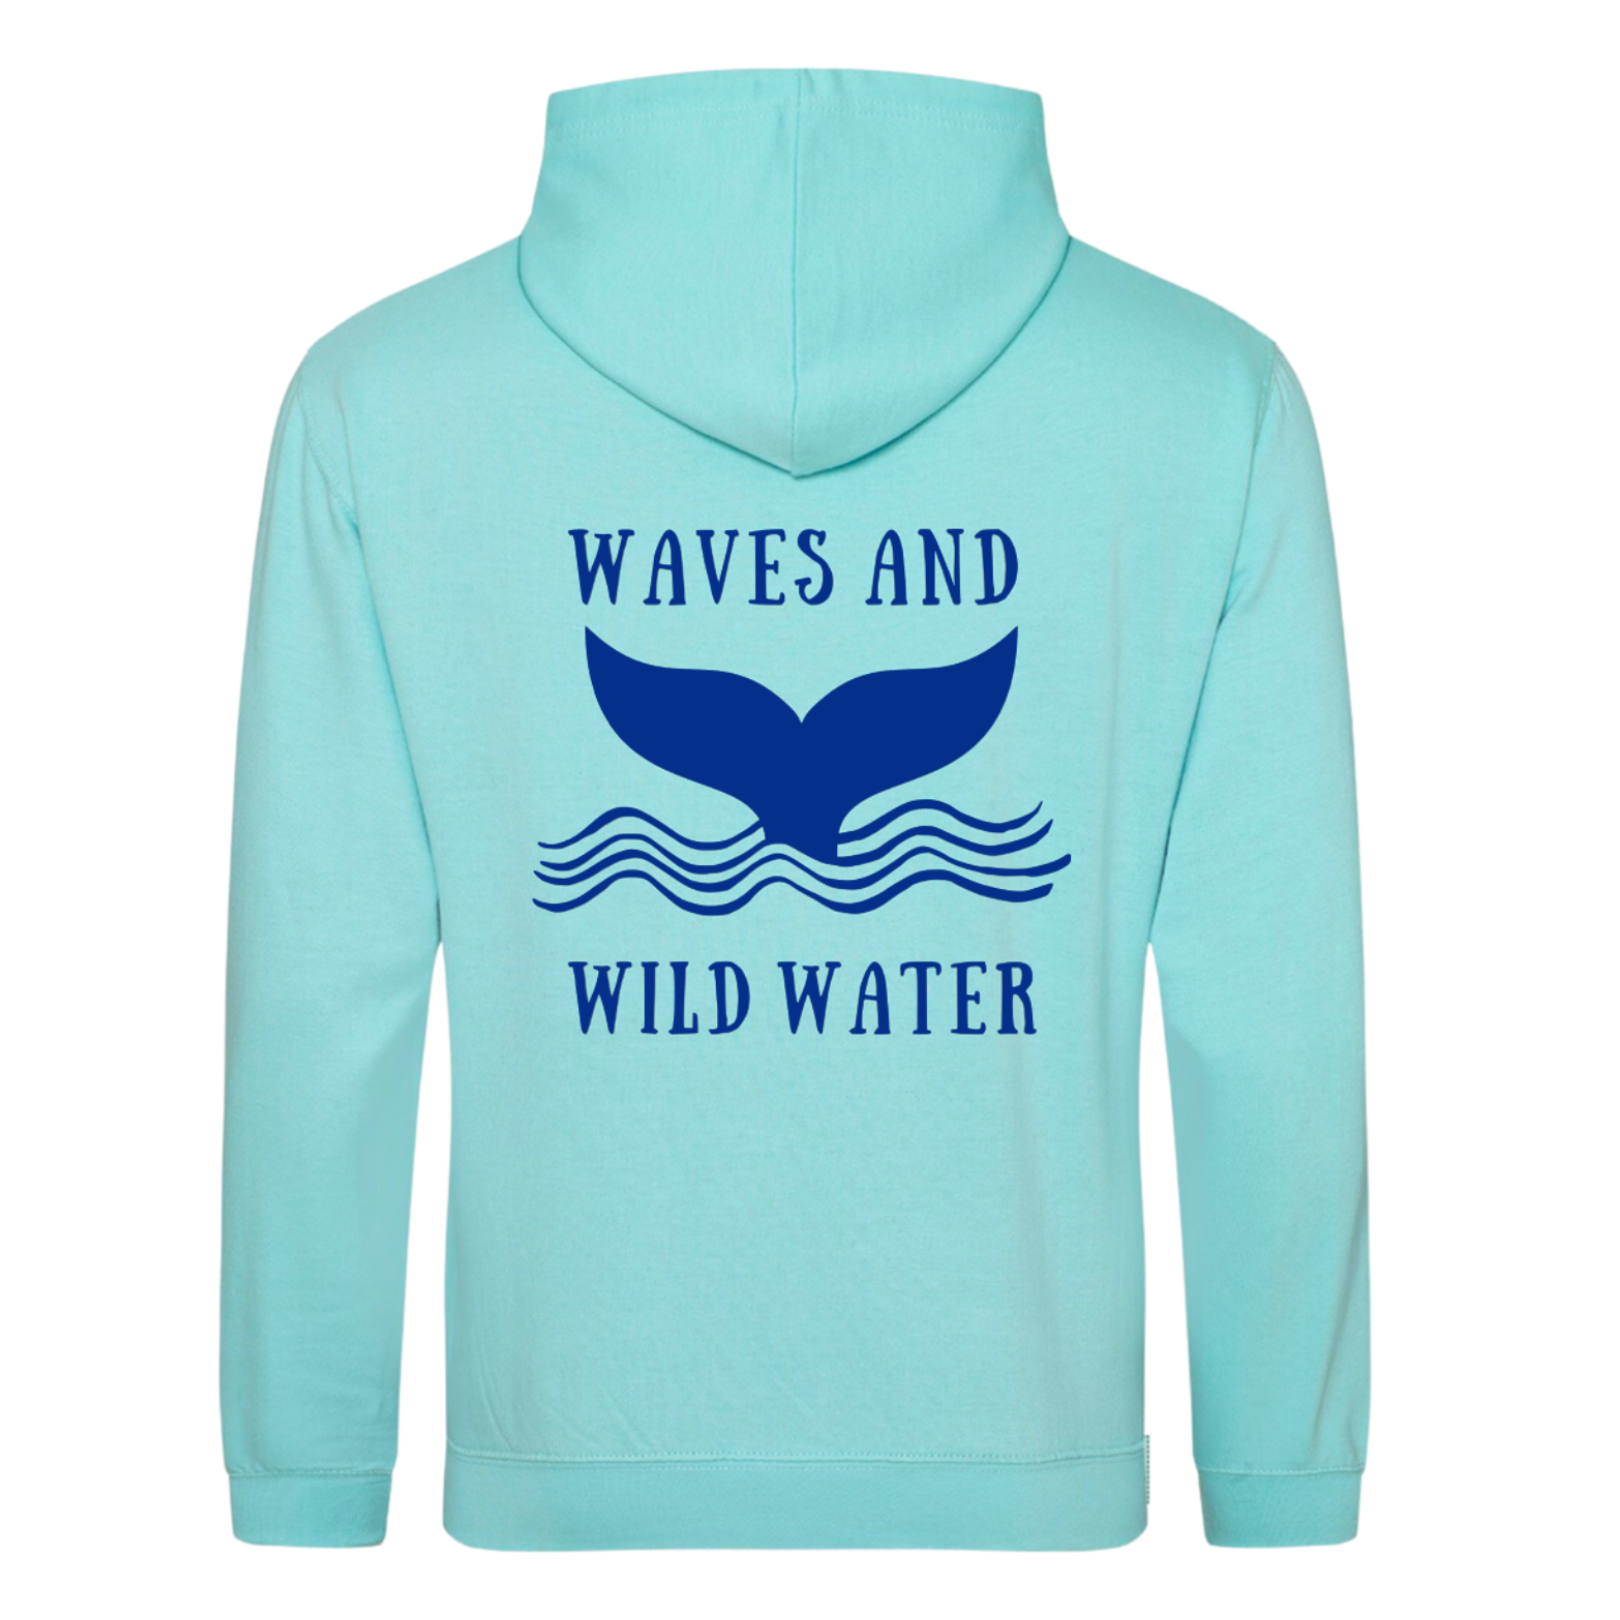 A lagoon blue hoodie with a blue Waves & Wild Water logo, depicting a whale tail coming out of the water.